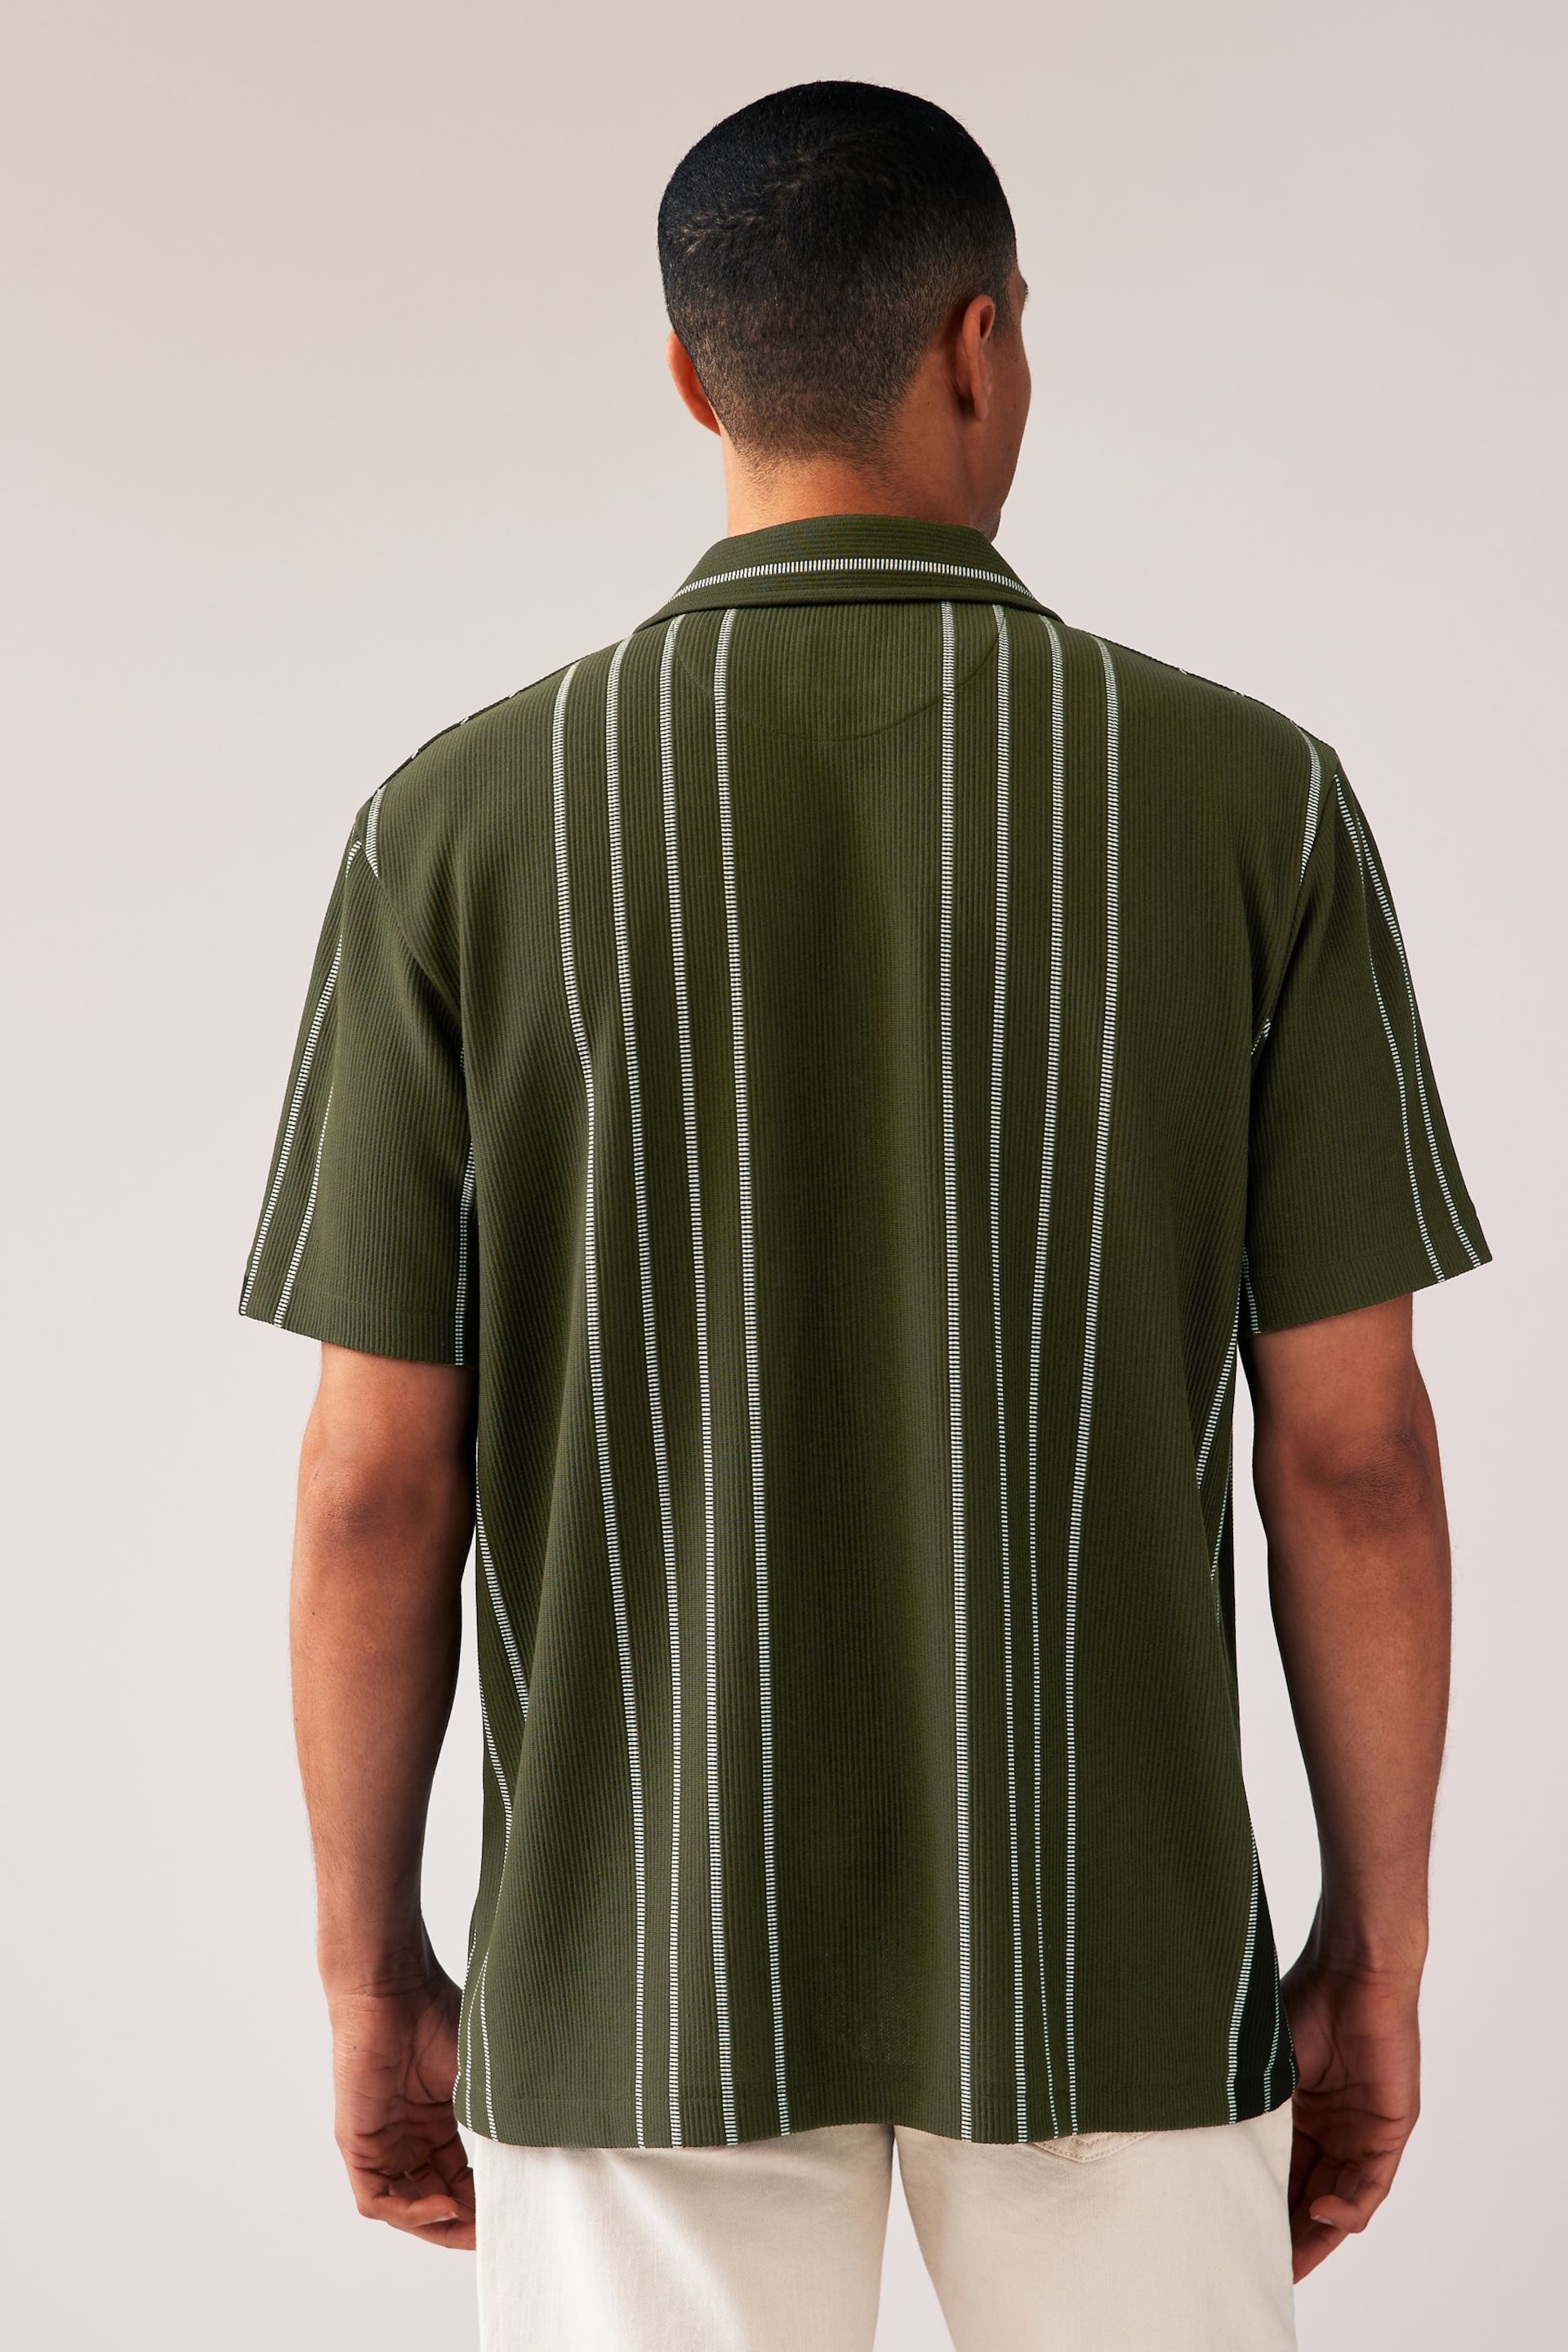 Olive Green Textured Jersey Short Sleeve Shirt - Image 3 of 7